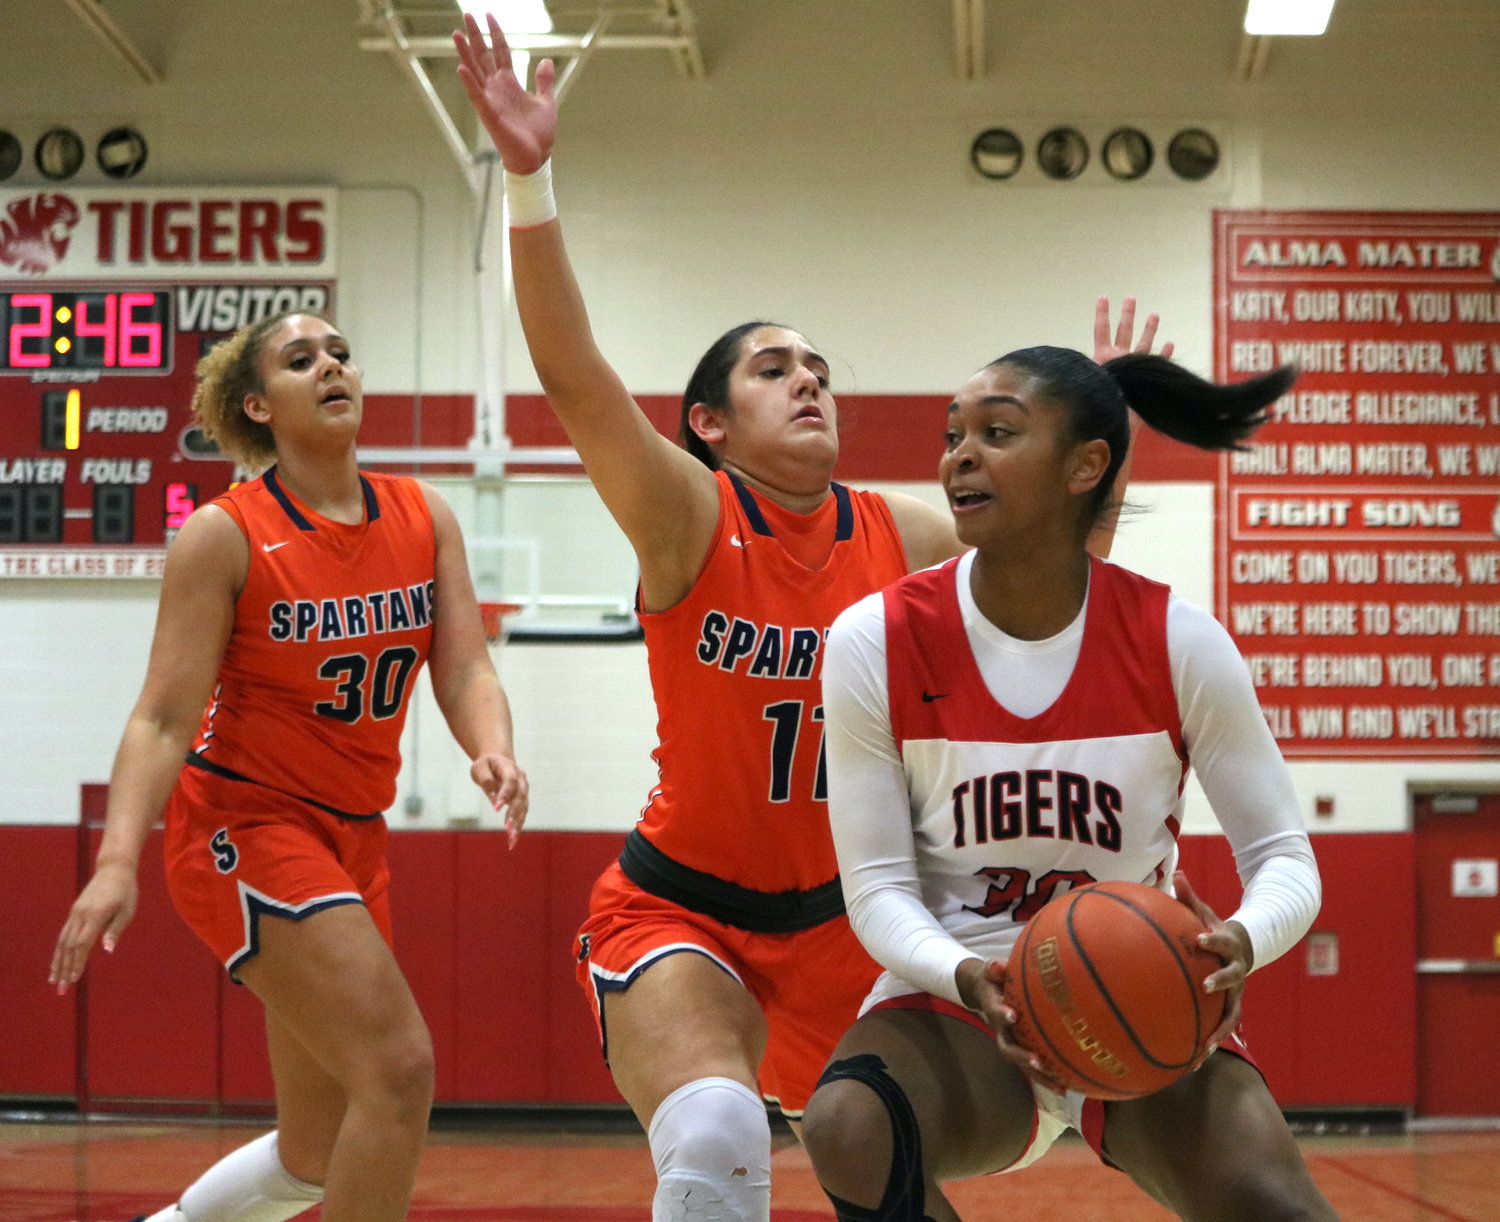 Lyric Barr drives past a defender during Friday's game between Seven Lakes and Katy at the Katy gym.